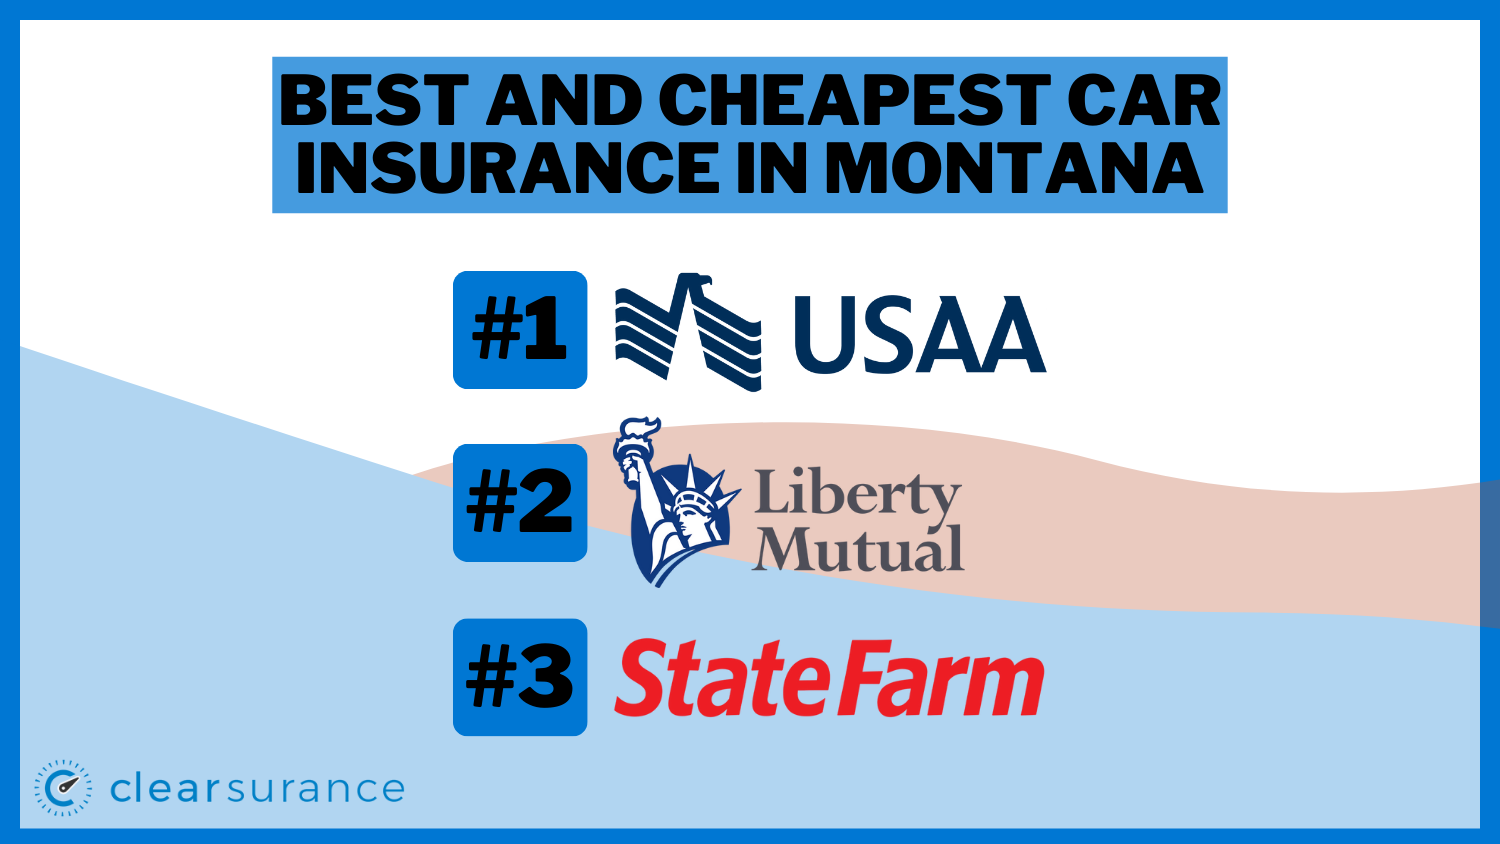 Best and Cheapest Car Insurance in Montana: USAA, Liberty Mutual, State Farm